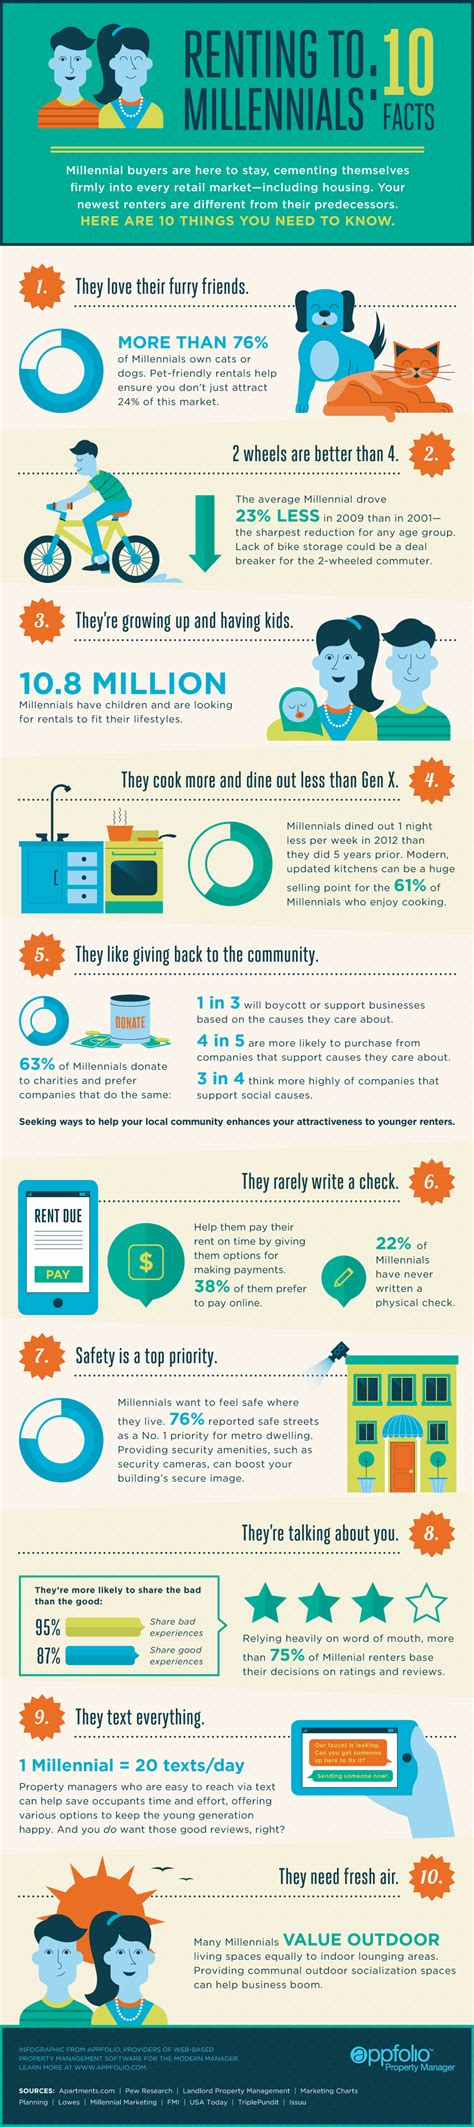 10 Things You Need To Know About The Millennial Renter Infographic